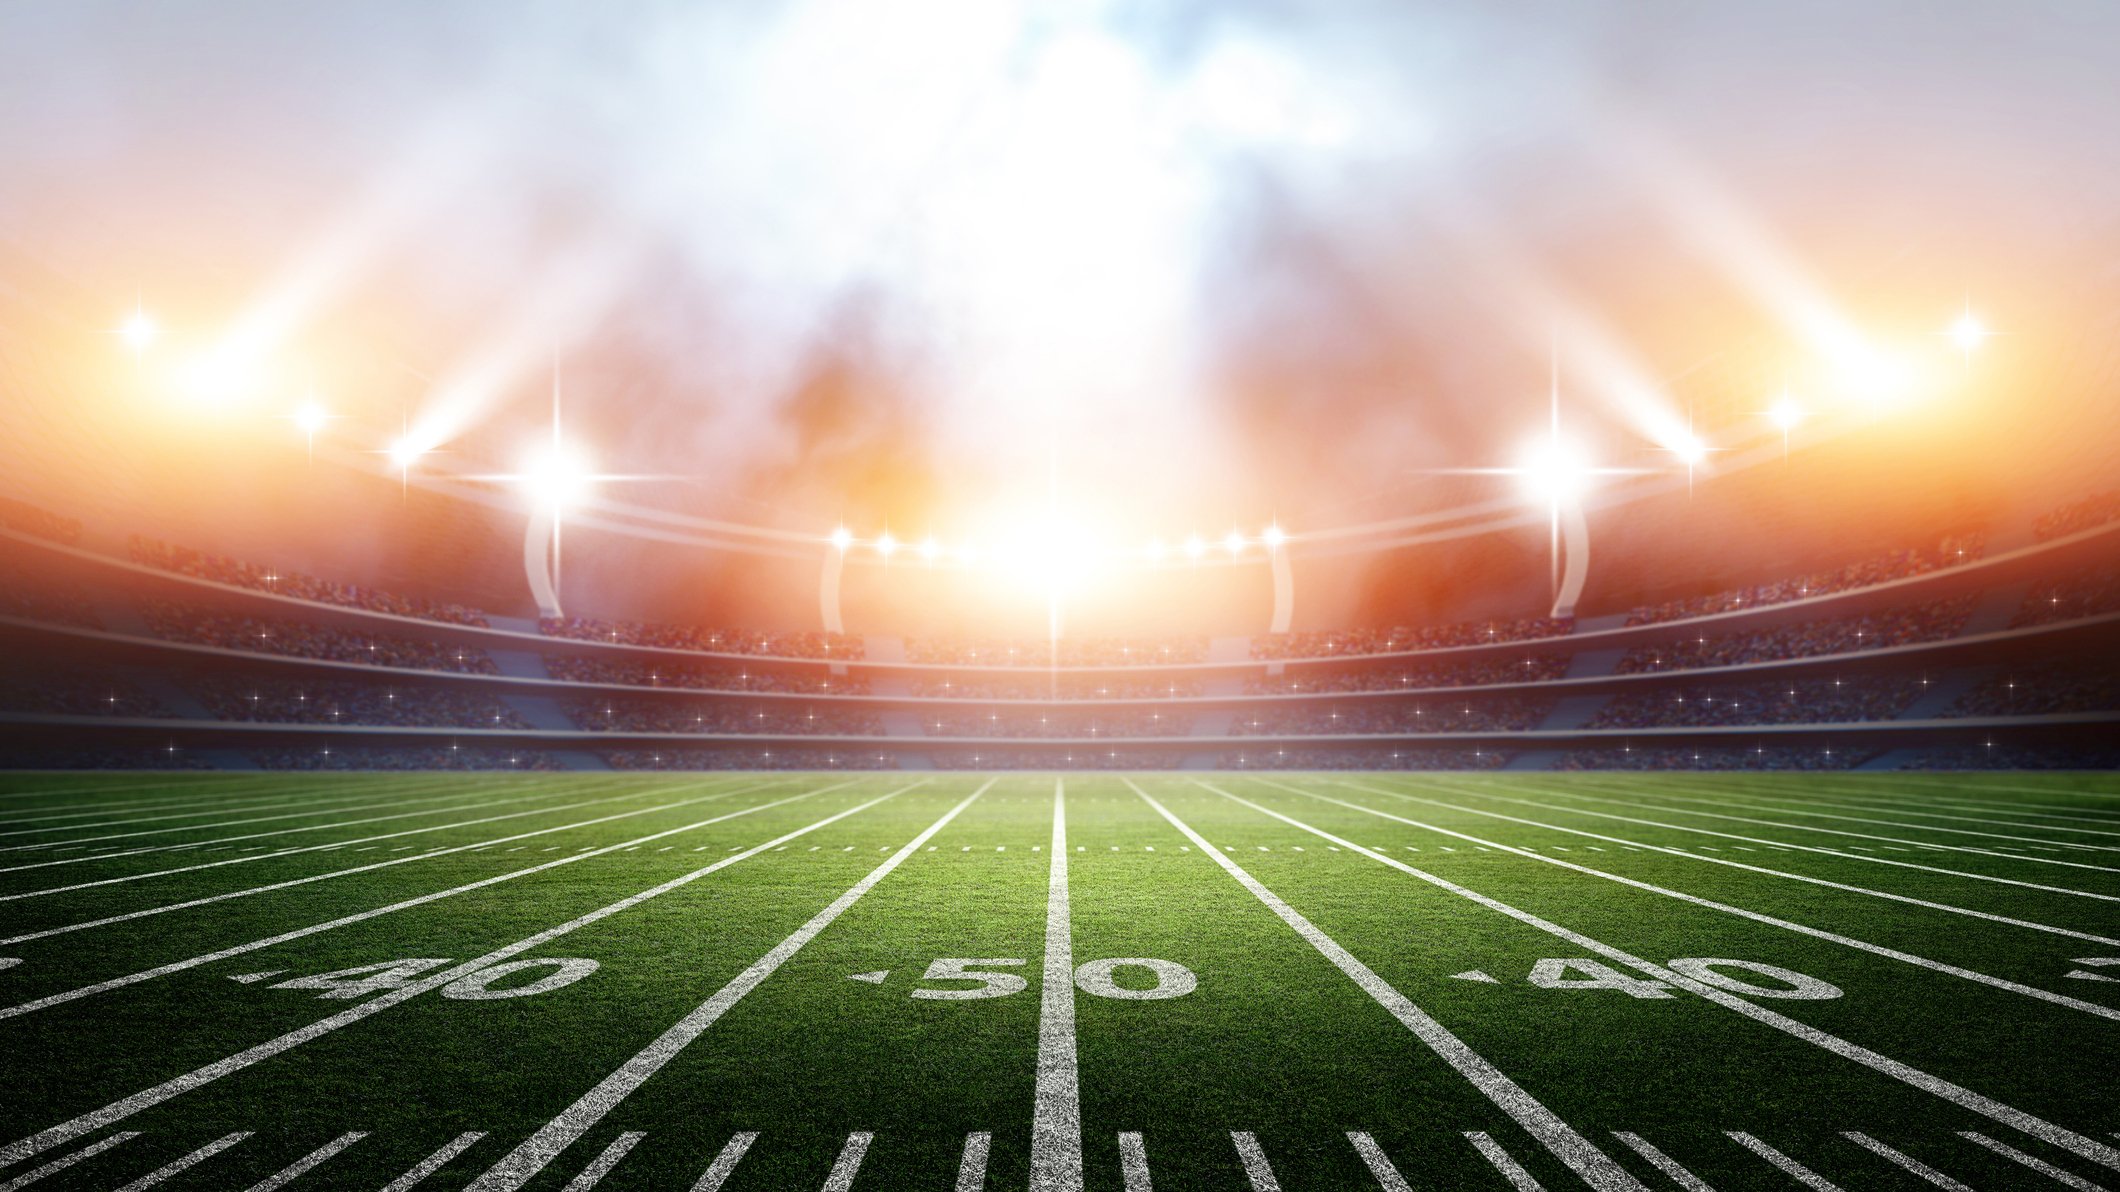 Cisco supplied image of an American Football field.